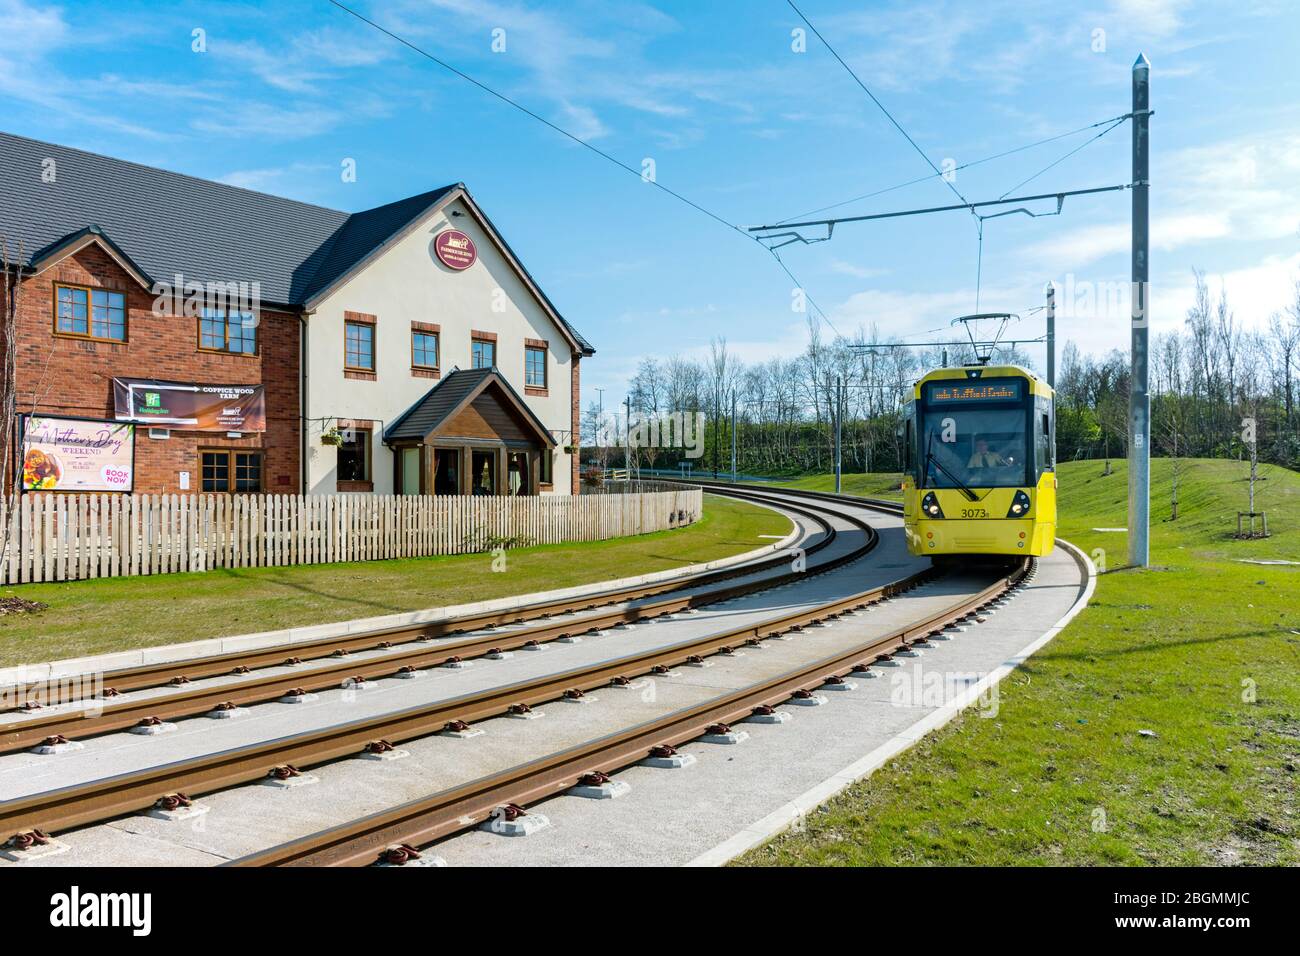 Metrolink tram passing the Coppice Wood Farm restaurant on the opening day of the Trafford Park Line, Barton Dock Rd., Trafford Park, Manchester, UK Stock Photo